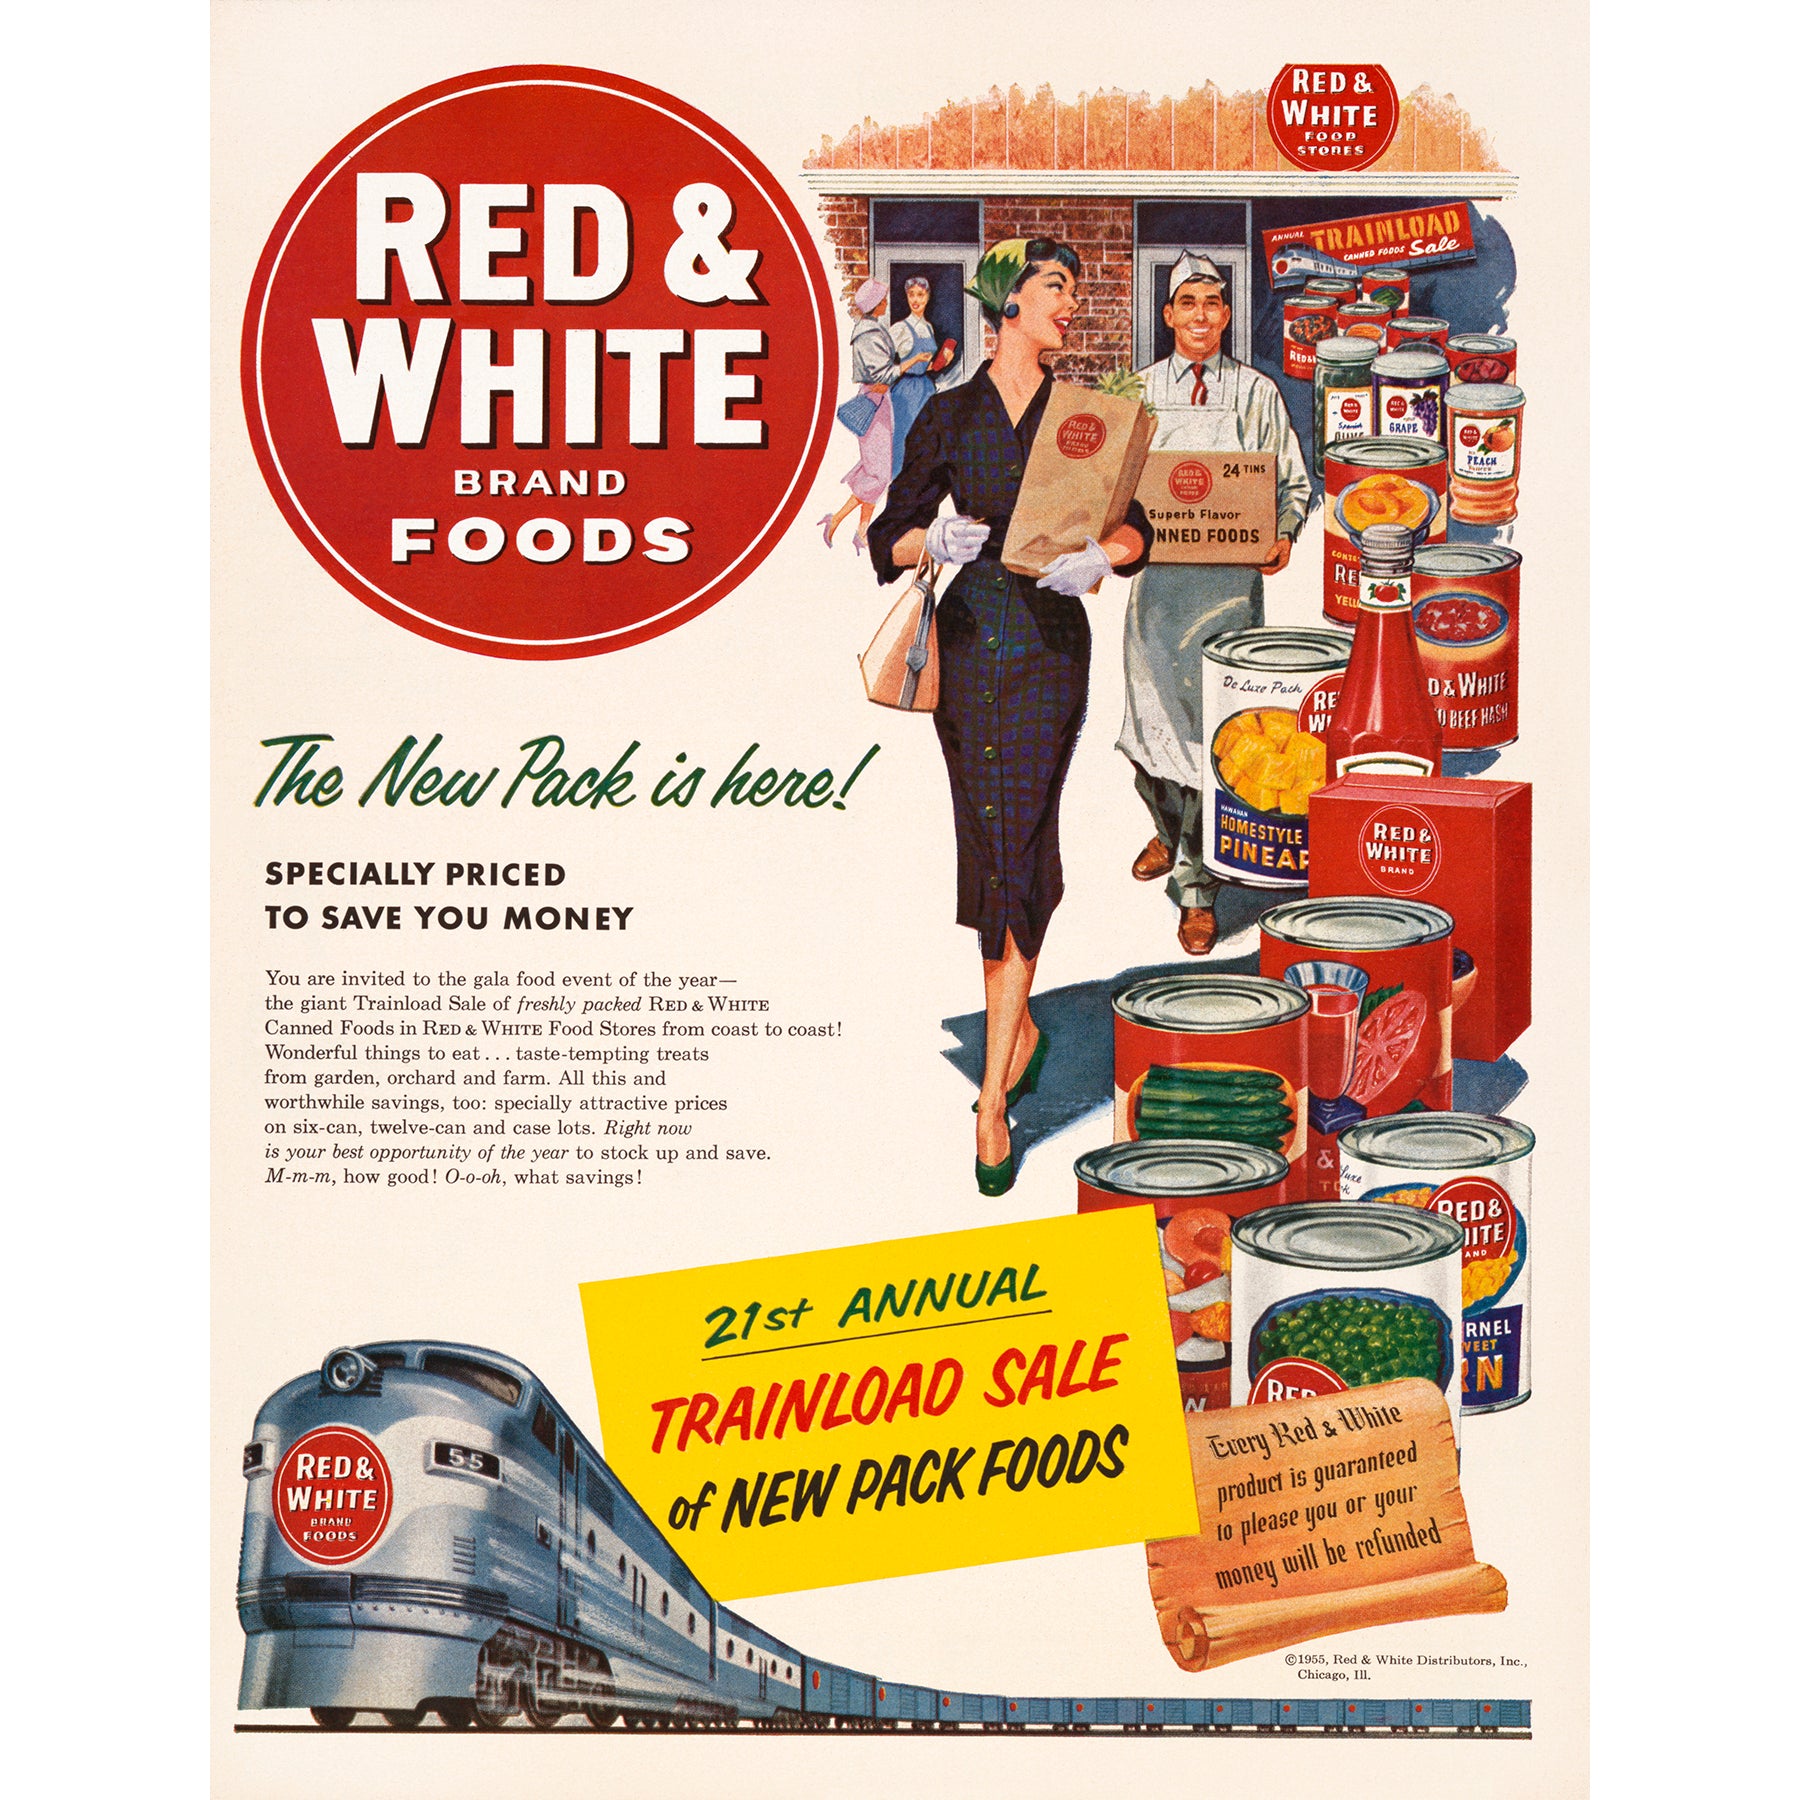 A vintage advertisement poster from Red & White Brand Foods, featuring a woman and store clerk